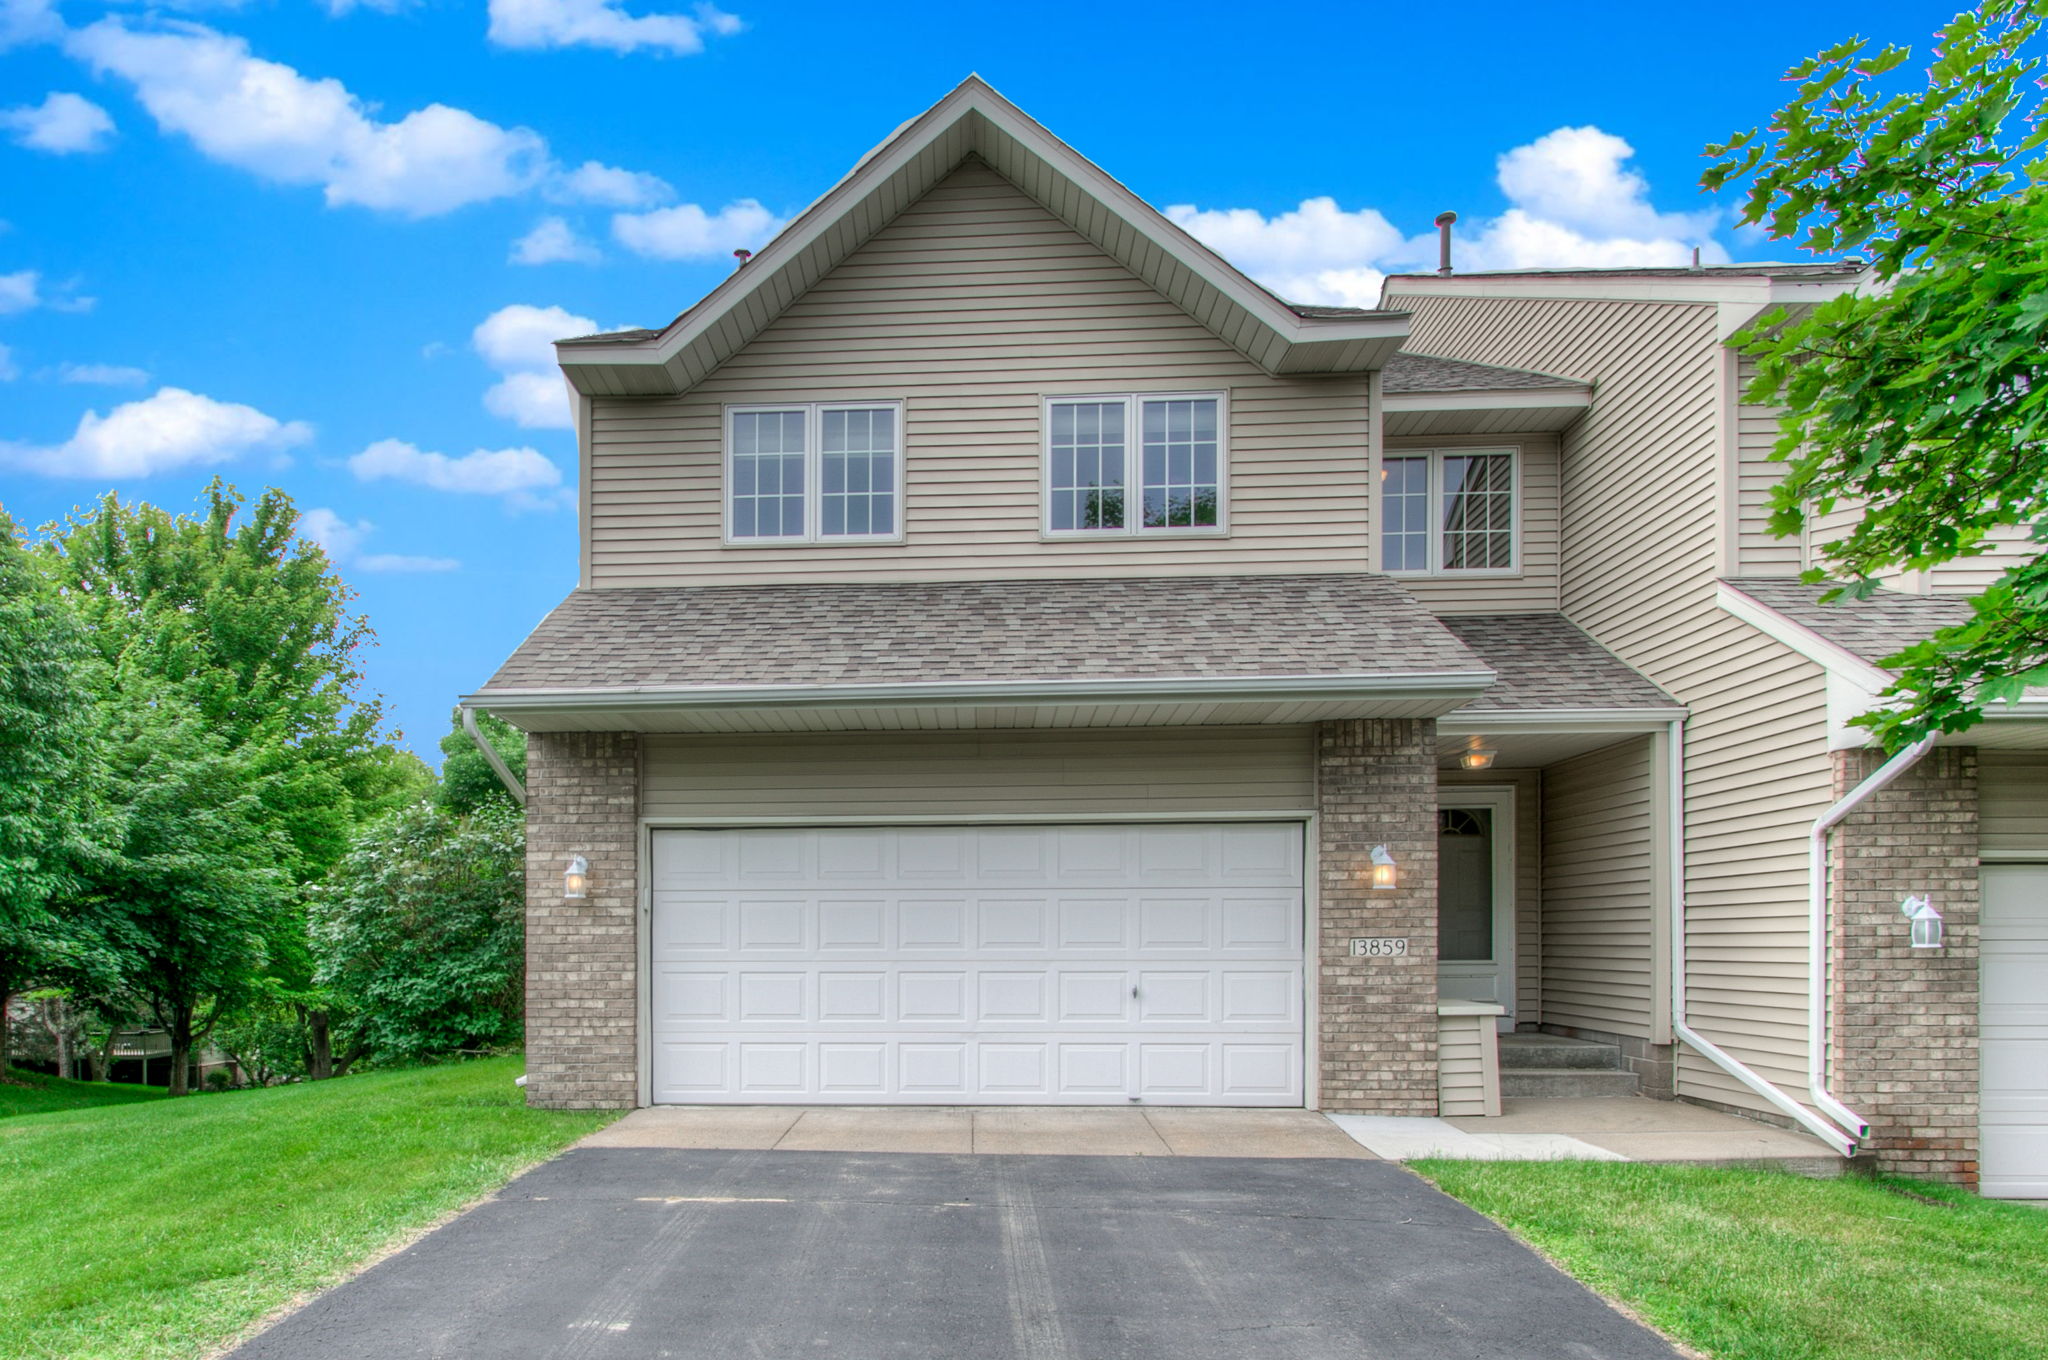  13859 85th Place North, Maple Grove, MN 55369, US